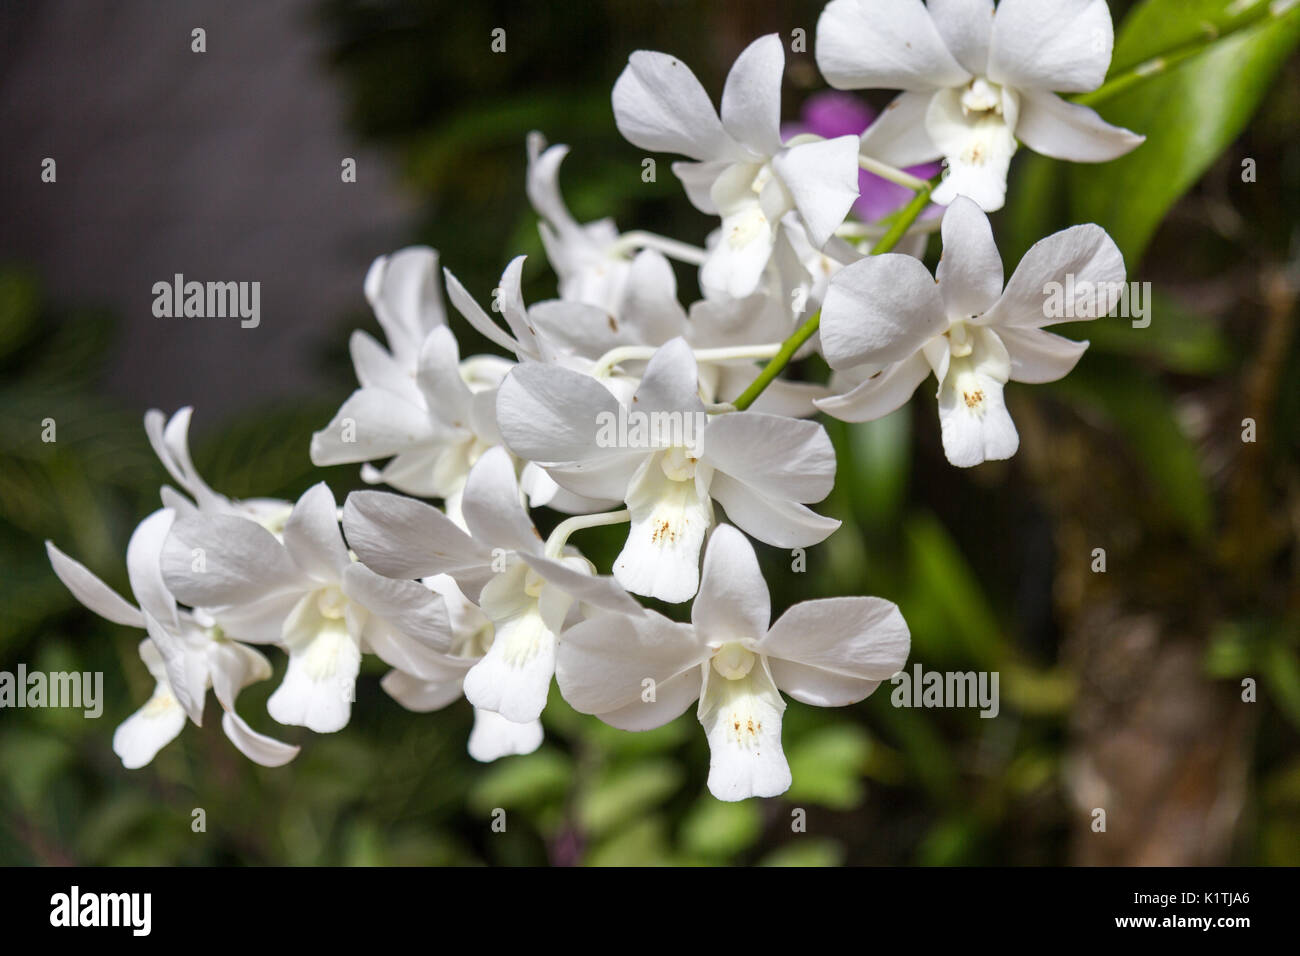 White orchid (Orchidaceae) Stock Photo